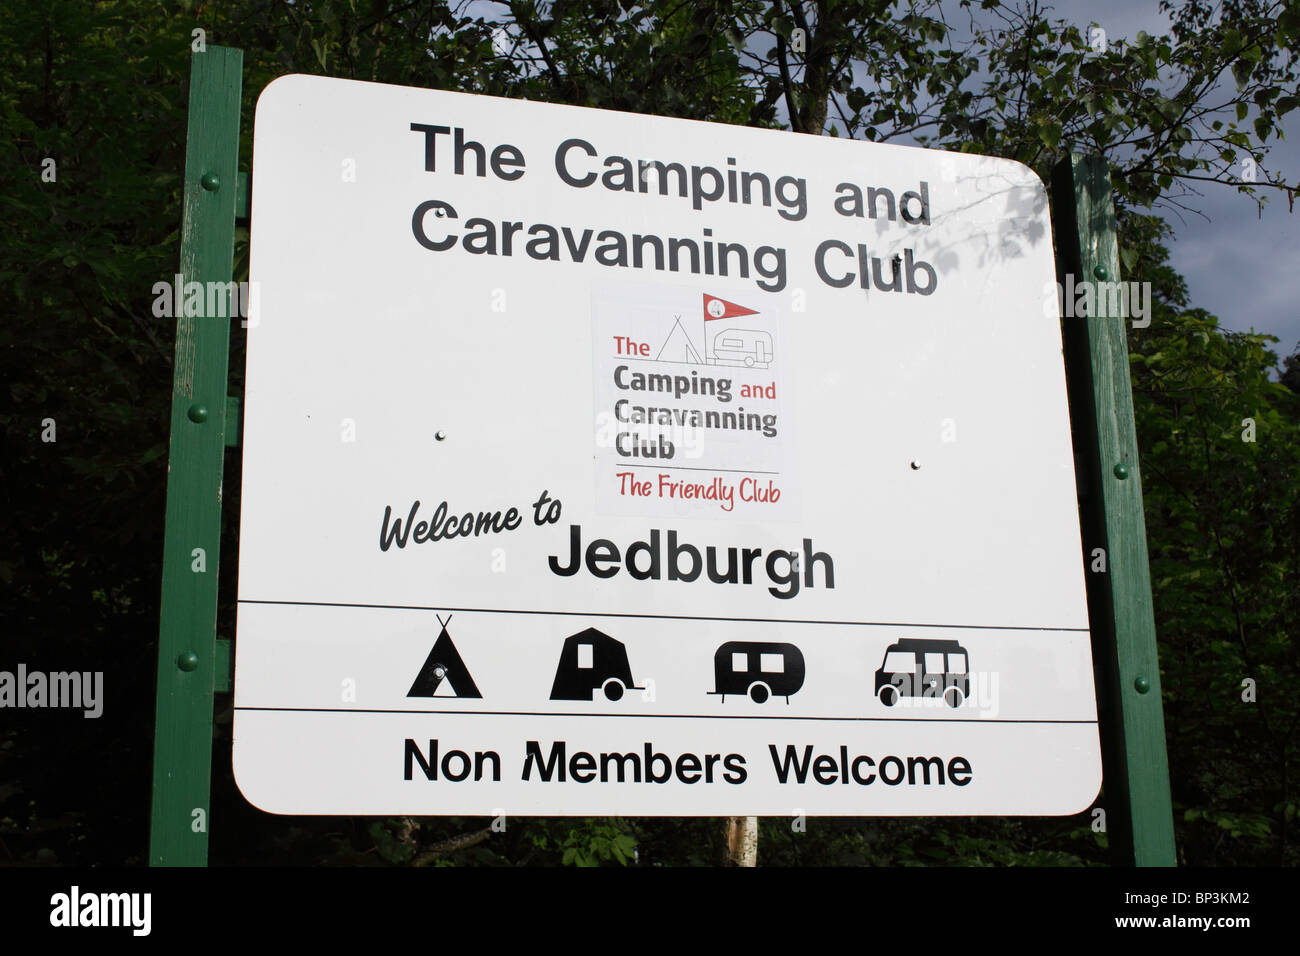 Camping and Caravanning Club sign at their Jedburgh site, Scottish Borders, UK Stock Photo